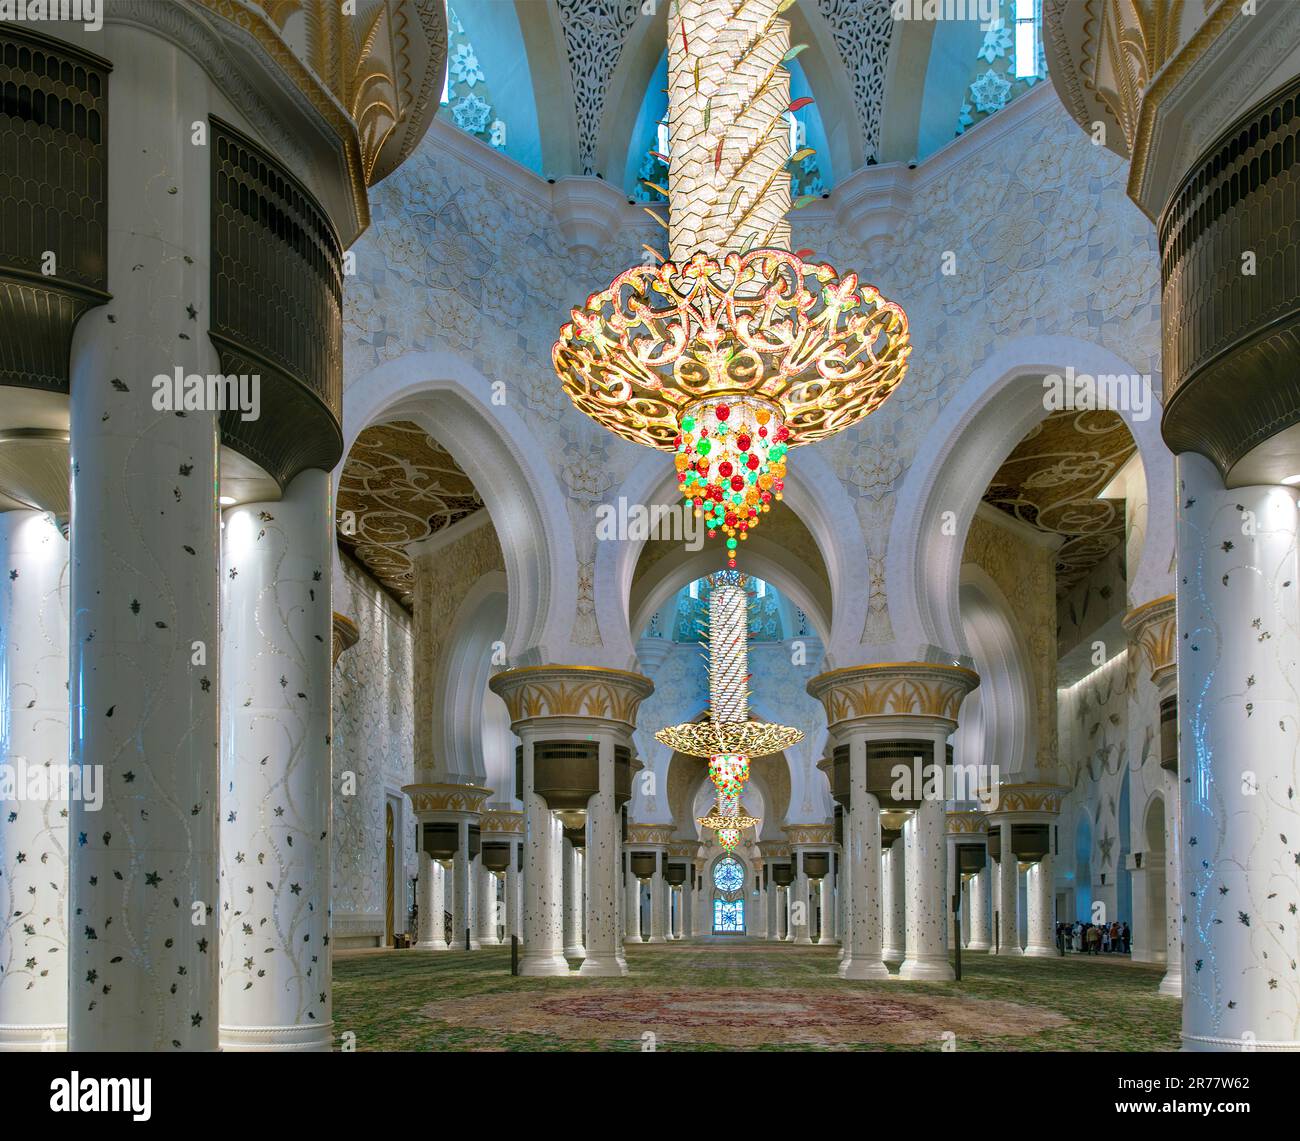 Three  of seven crystal chandeliers by Faustig of Munich, Germany in the Sheik Zayed Grand Mosque, Abu Dhabi, UAE Stock Photo